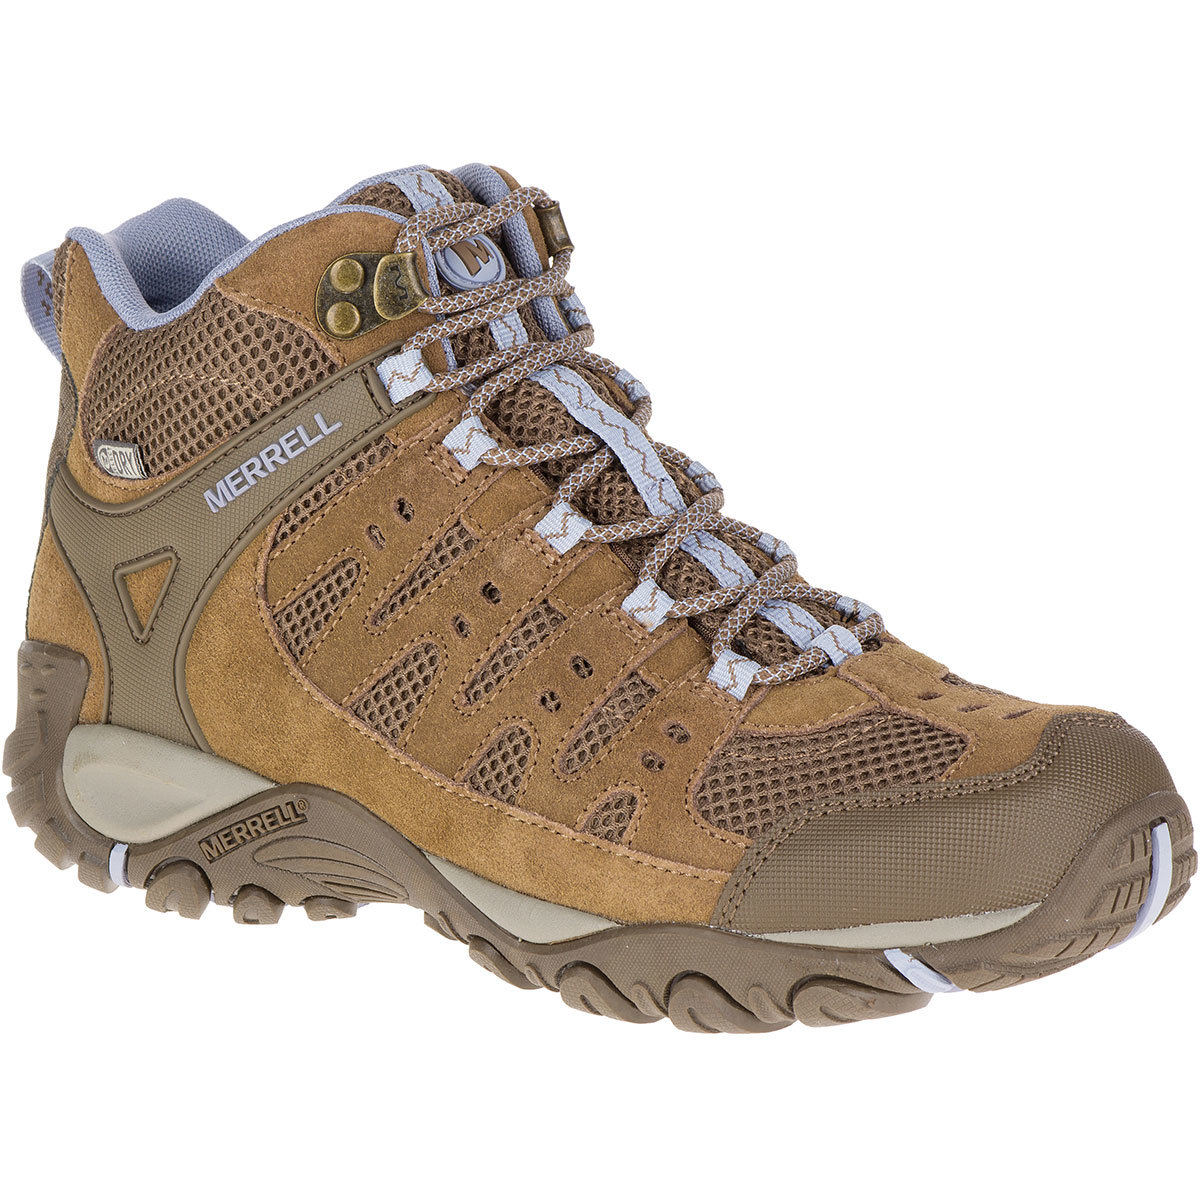 merrell women's accentor low hiking shoes